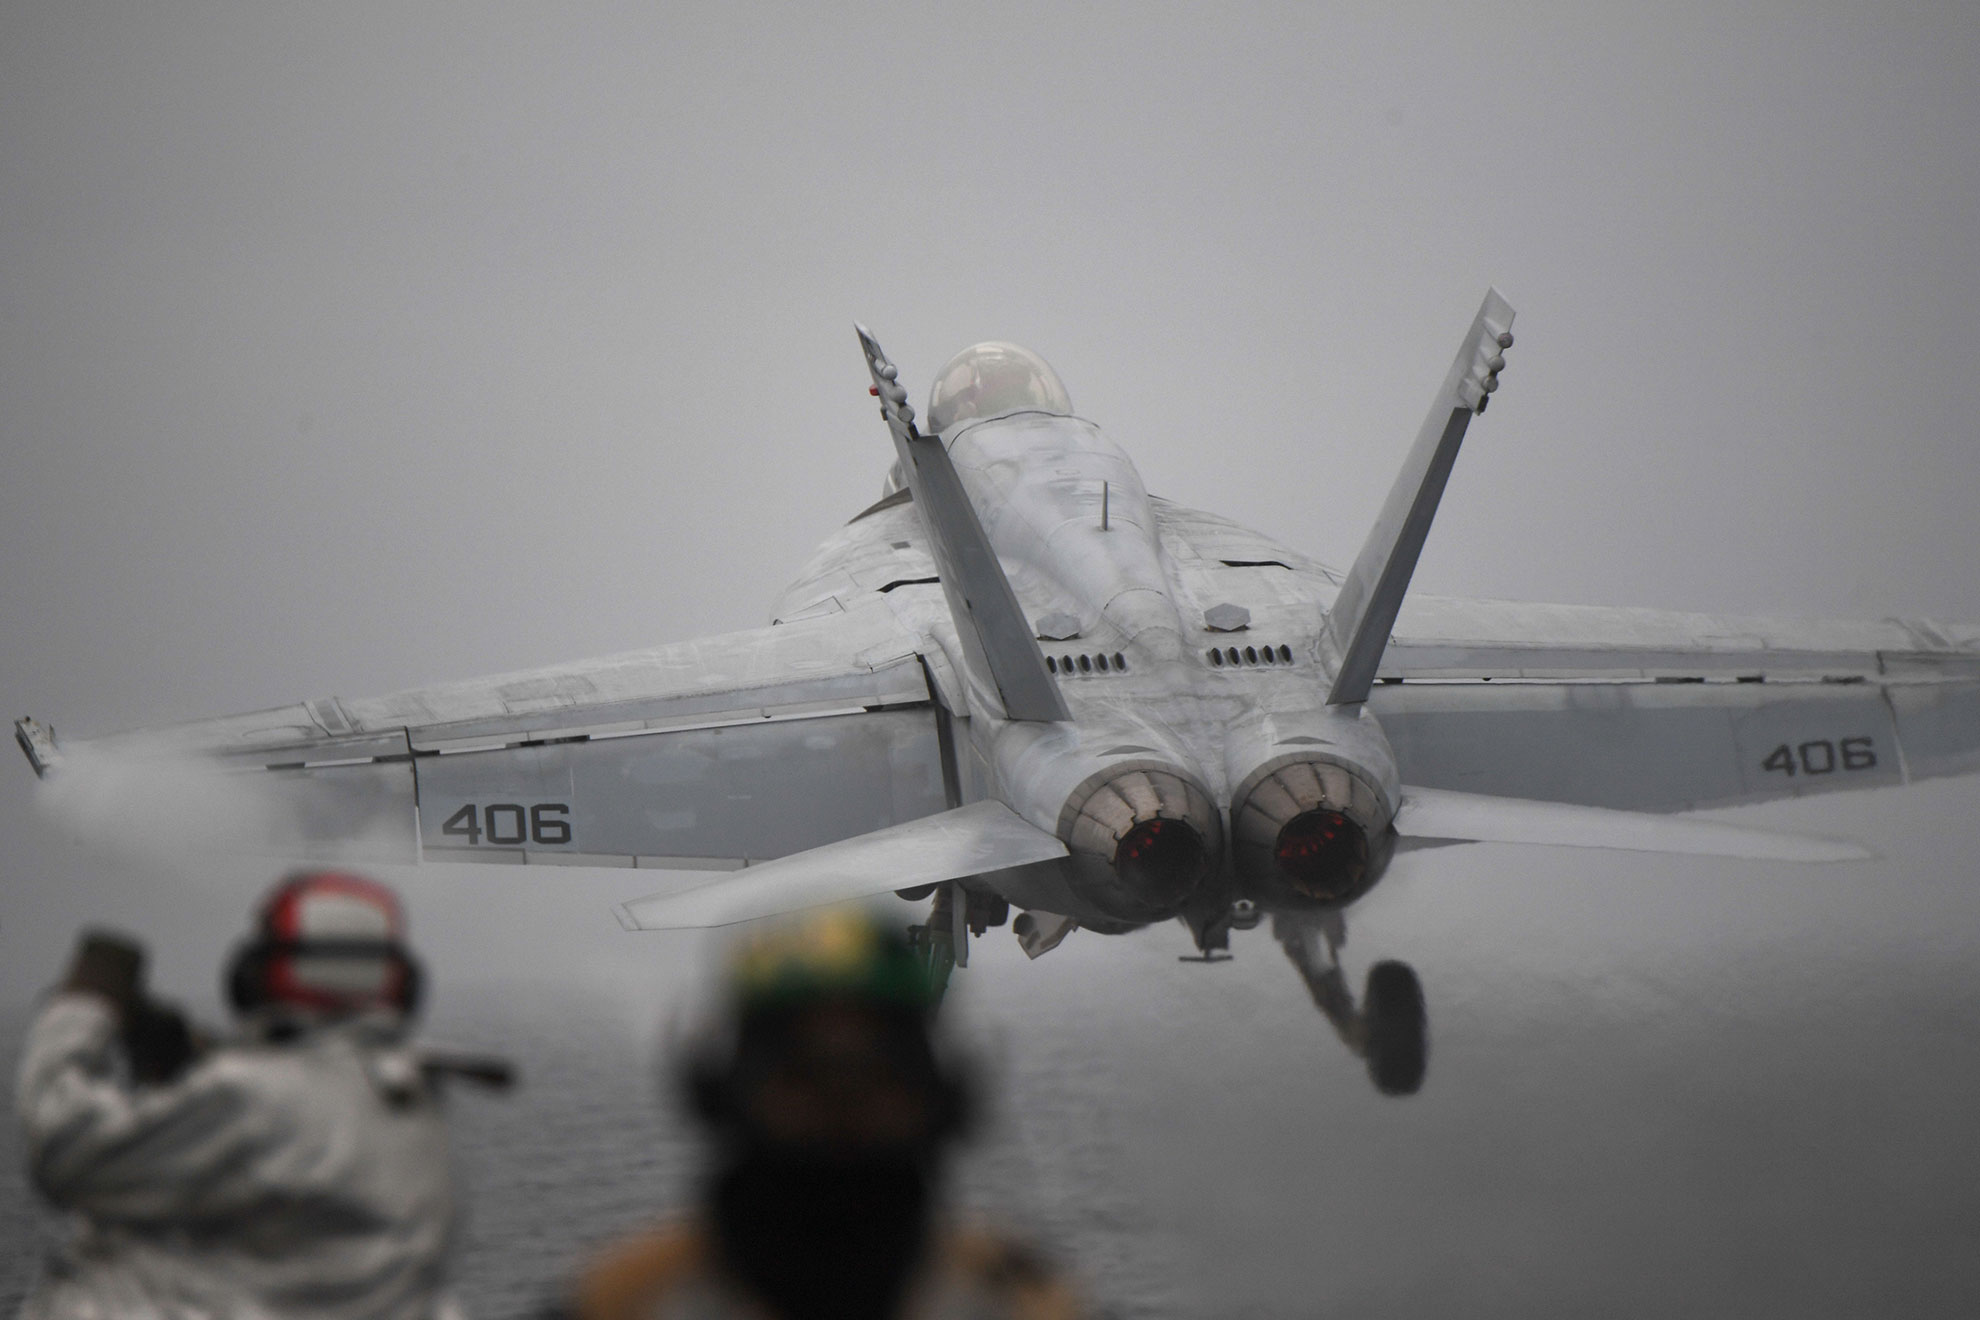 Norvegian Sea (Oct. 19, 2018) An F/A-18E Super Hornet, assigned to the "Sunliners" of Strike Fighter Squadron (VFA) 81, launches from the Nimitz-class aircraft carrier USS Harry S. Truman (CVN 75). For the first time in nearly 30 years, a U.S. aircraft carrier has entered the Arctic Circle. Accompanied by select ships from Carrier Strike Group Eight (CSG- 8), Harry S. Truman traveled north to demonstrate the flexibility and toughness of U.S. naval forces through high-end warfare training with regional allies and partners -- U.S. Navy photo by MCS2 Thomas Gooley. -